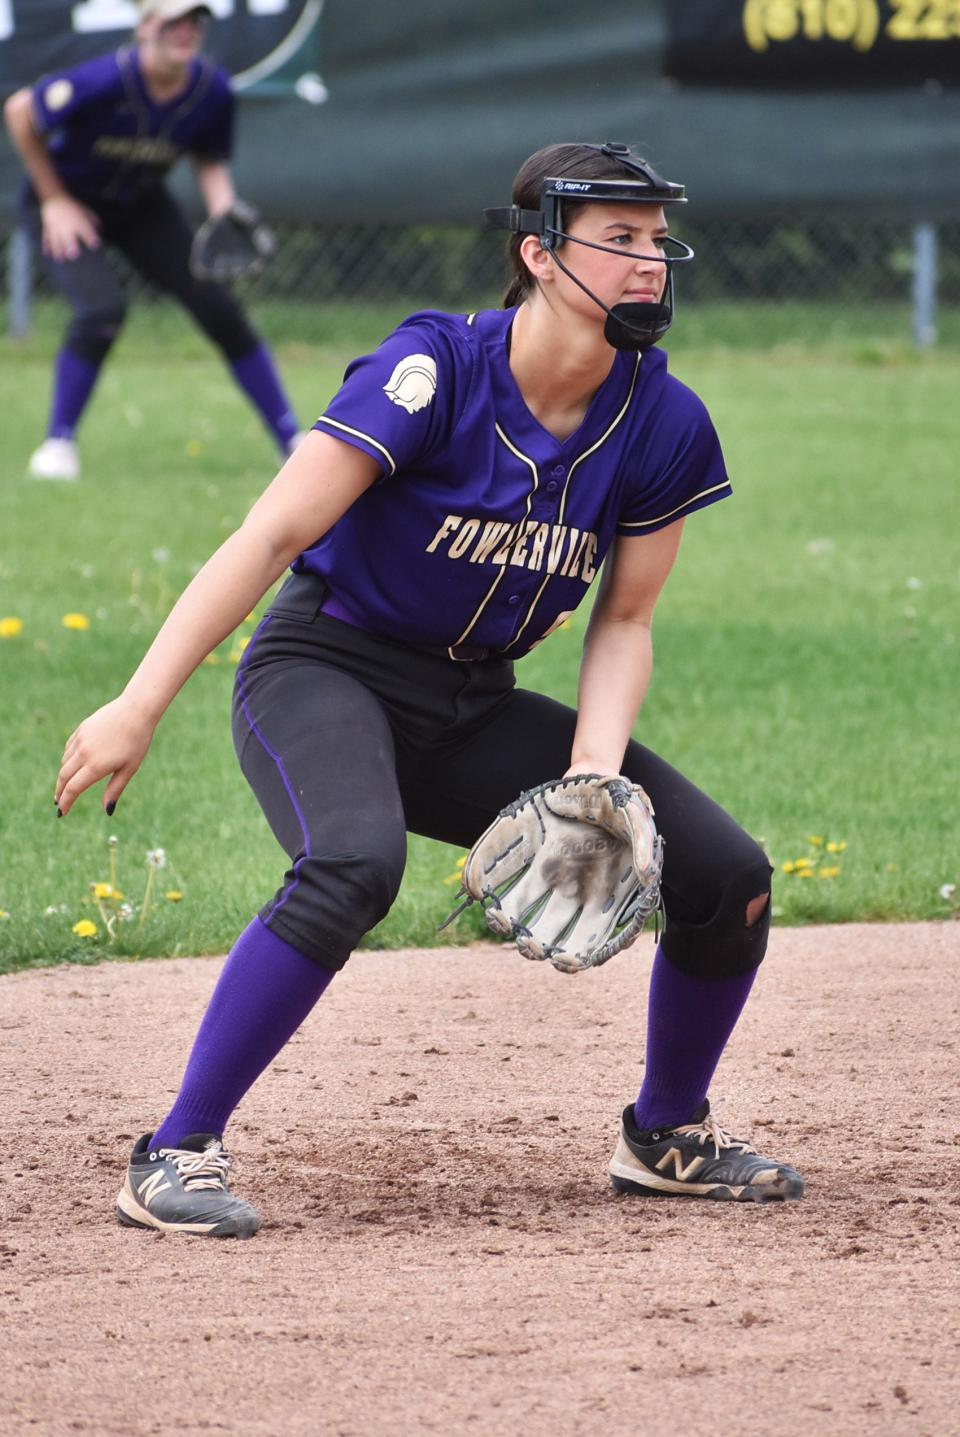 Tori Briggs has played multiple positions for Fowlerville's softball team this season.